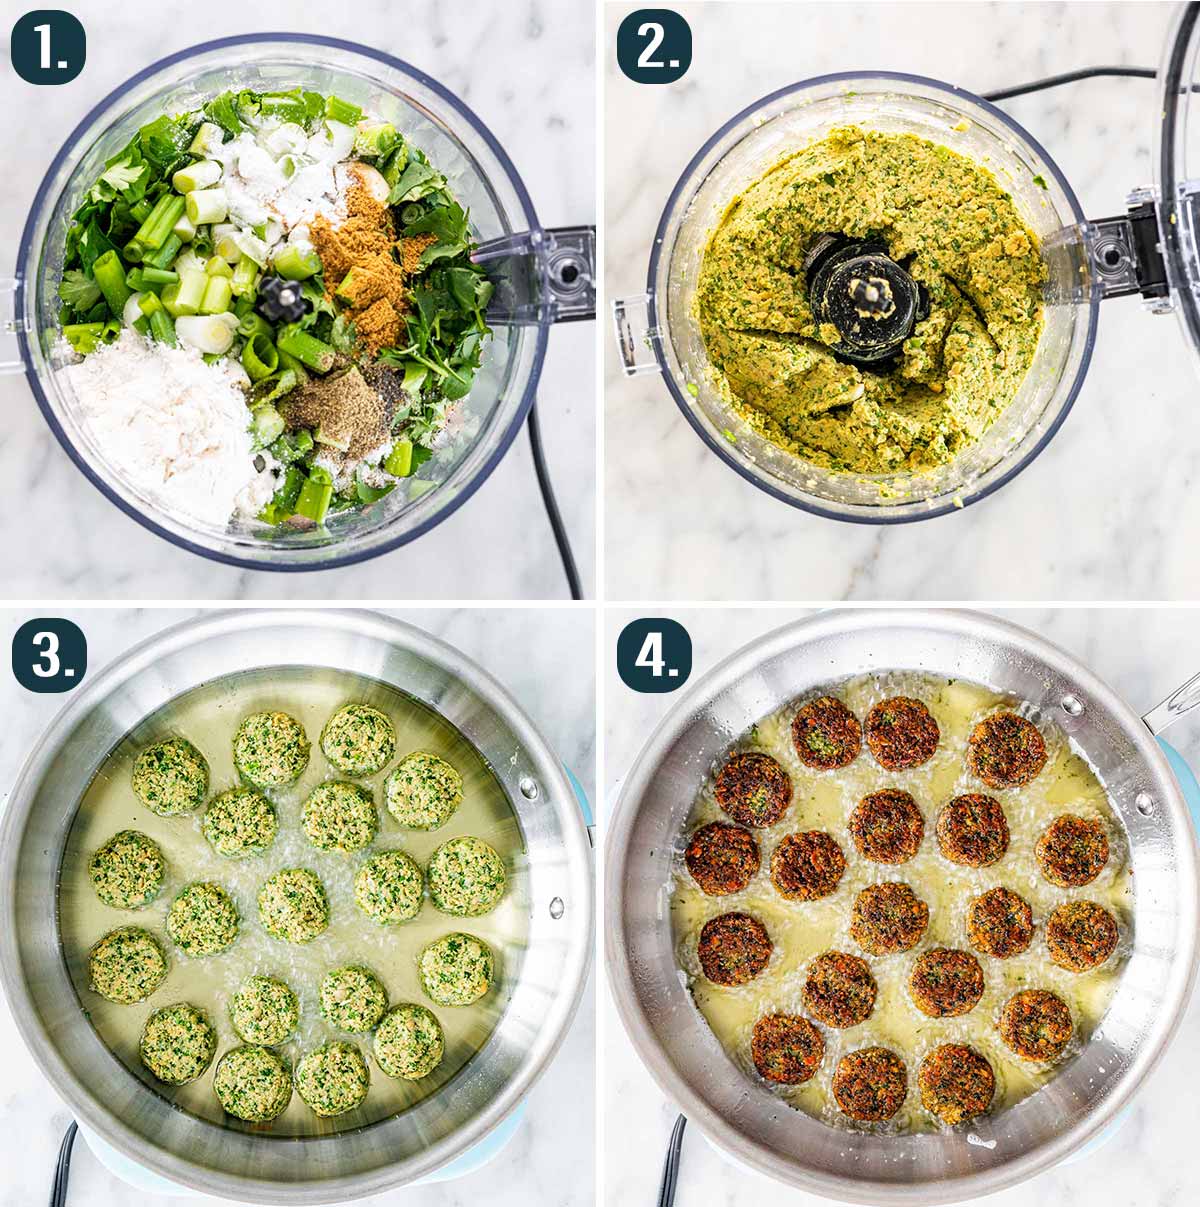 detailed process shots showing how to make falafel.